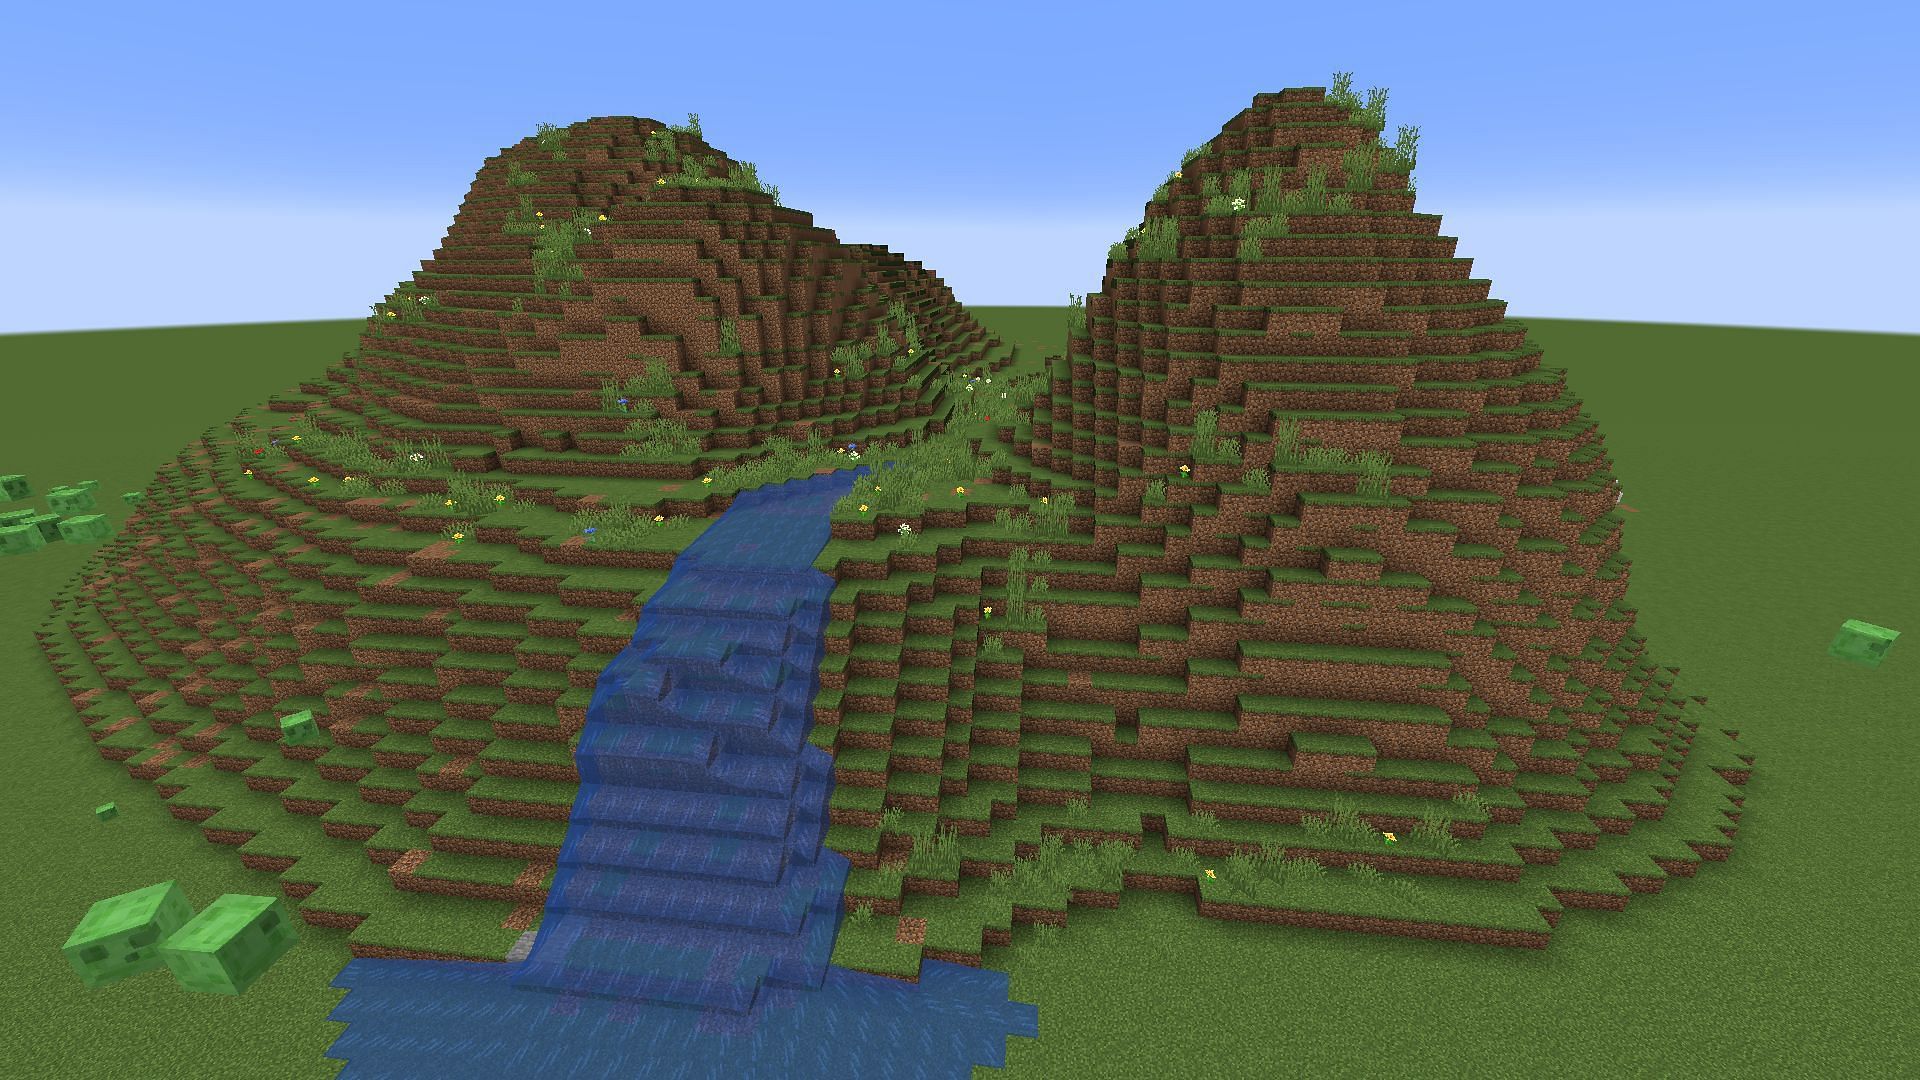 A basic hill built using Axiom in only a few minutes (Image via Mojang)